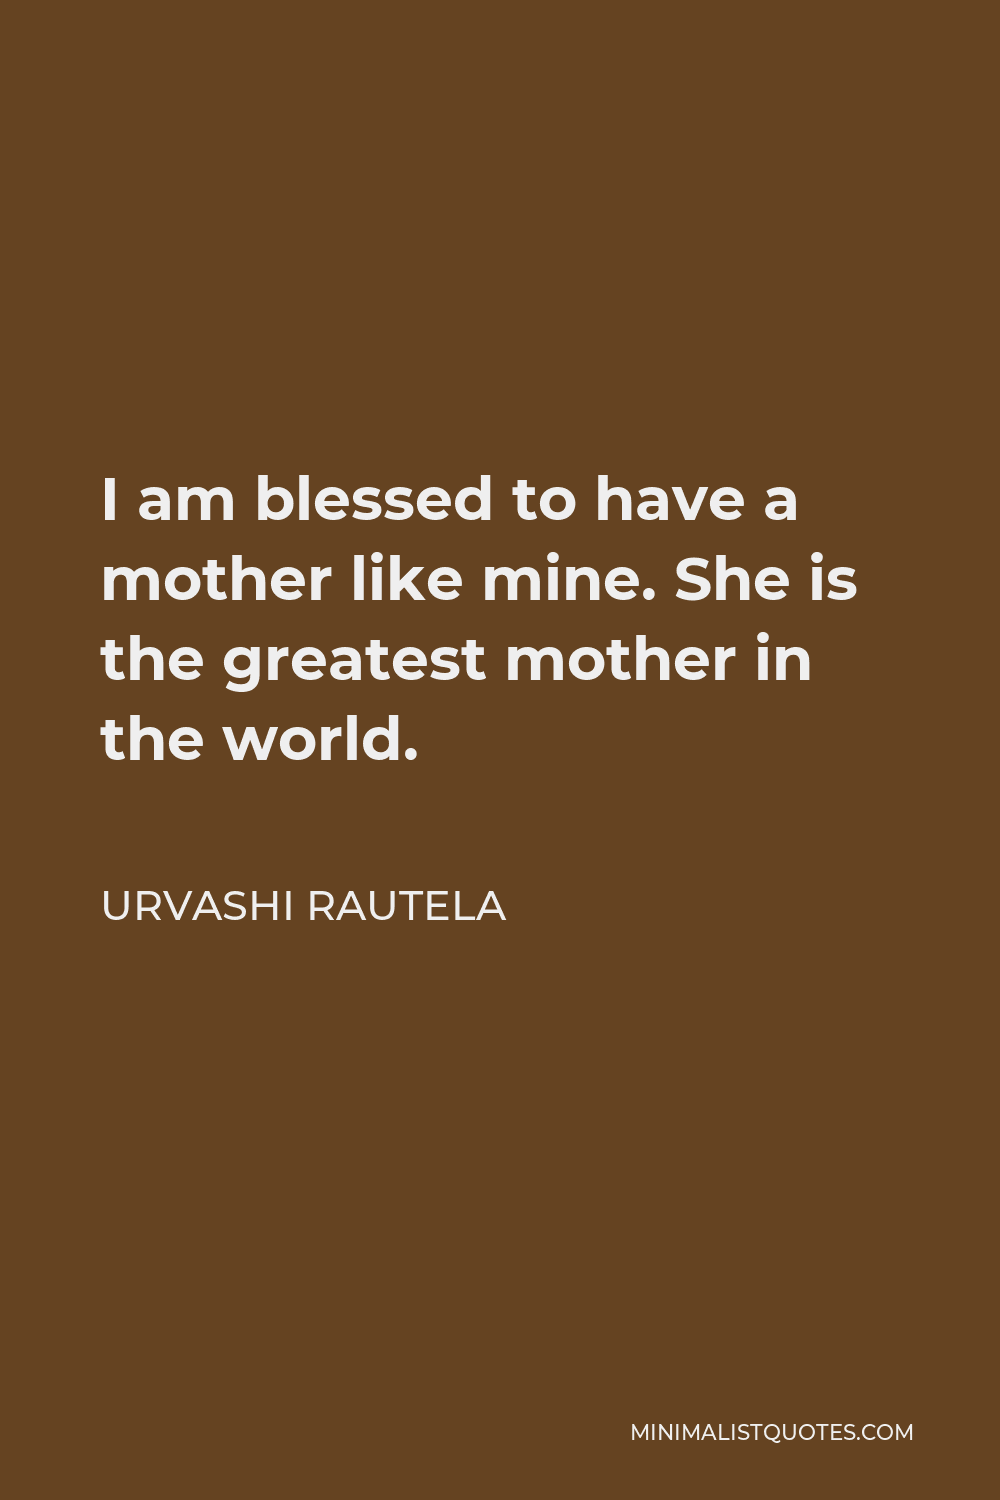 Urvashi Rautela Quote - I am blessed to have a mother like mine. She is the greatest mother in the world.